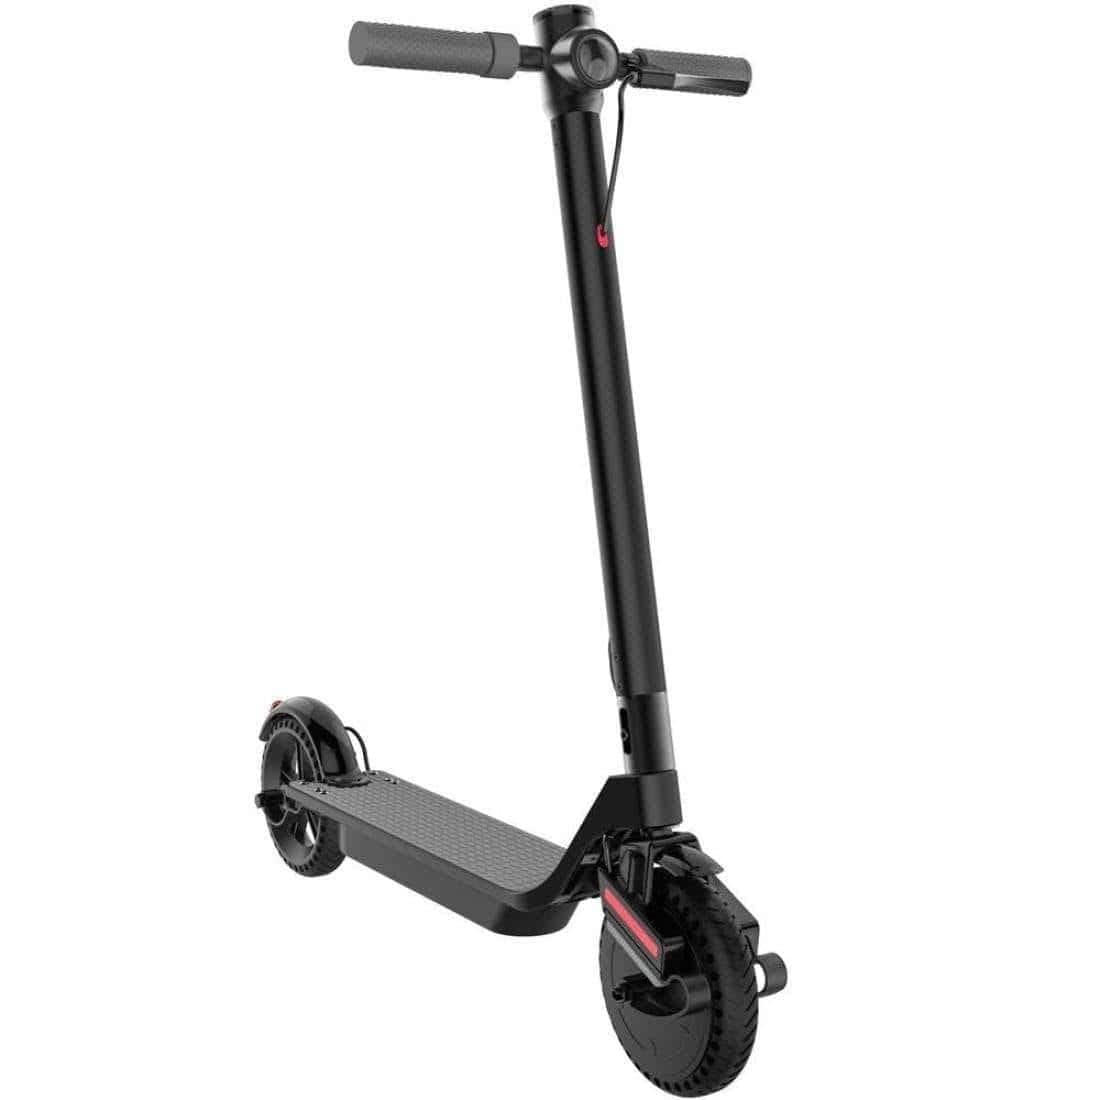 MotoTec Electric Scooter MotoTec 853 Pro 36v 7.5ah 350w Lithium Electric Scooter Black